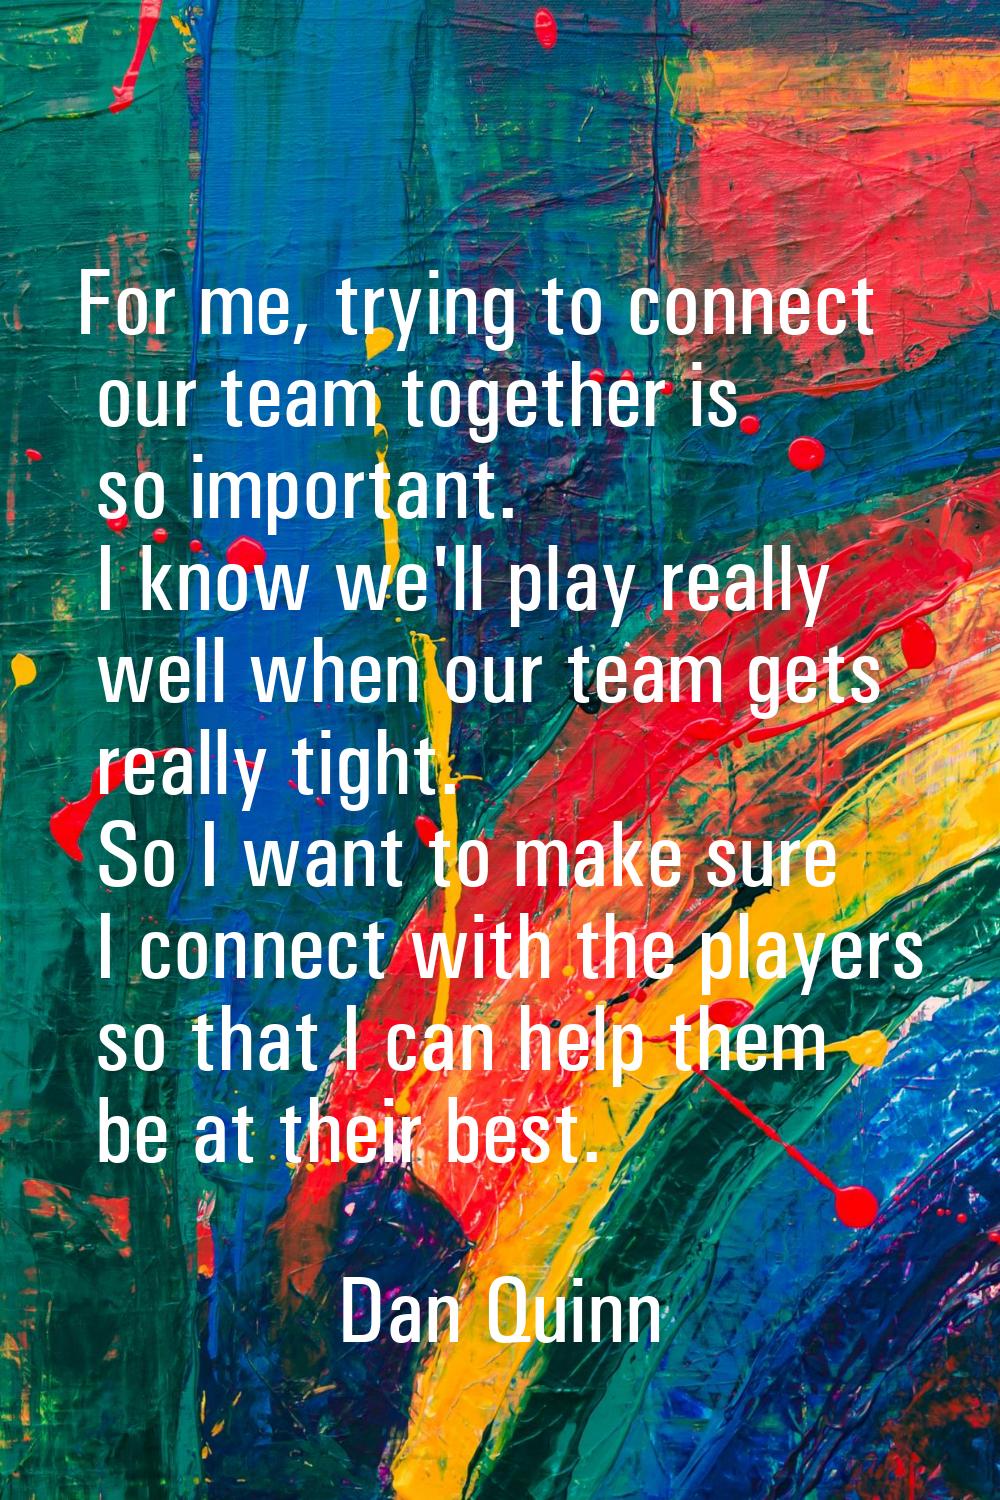 For me, trying to connect our team together is so important. I know we'll play really well when our